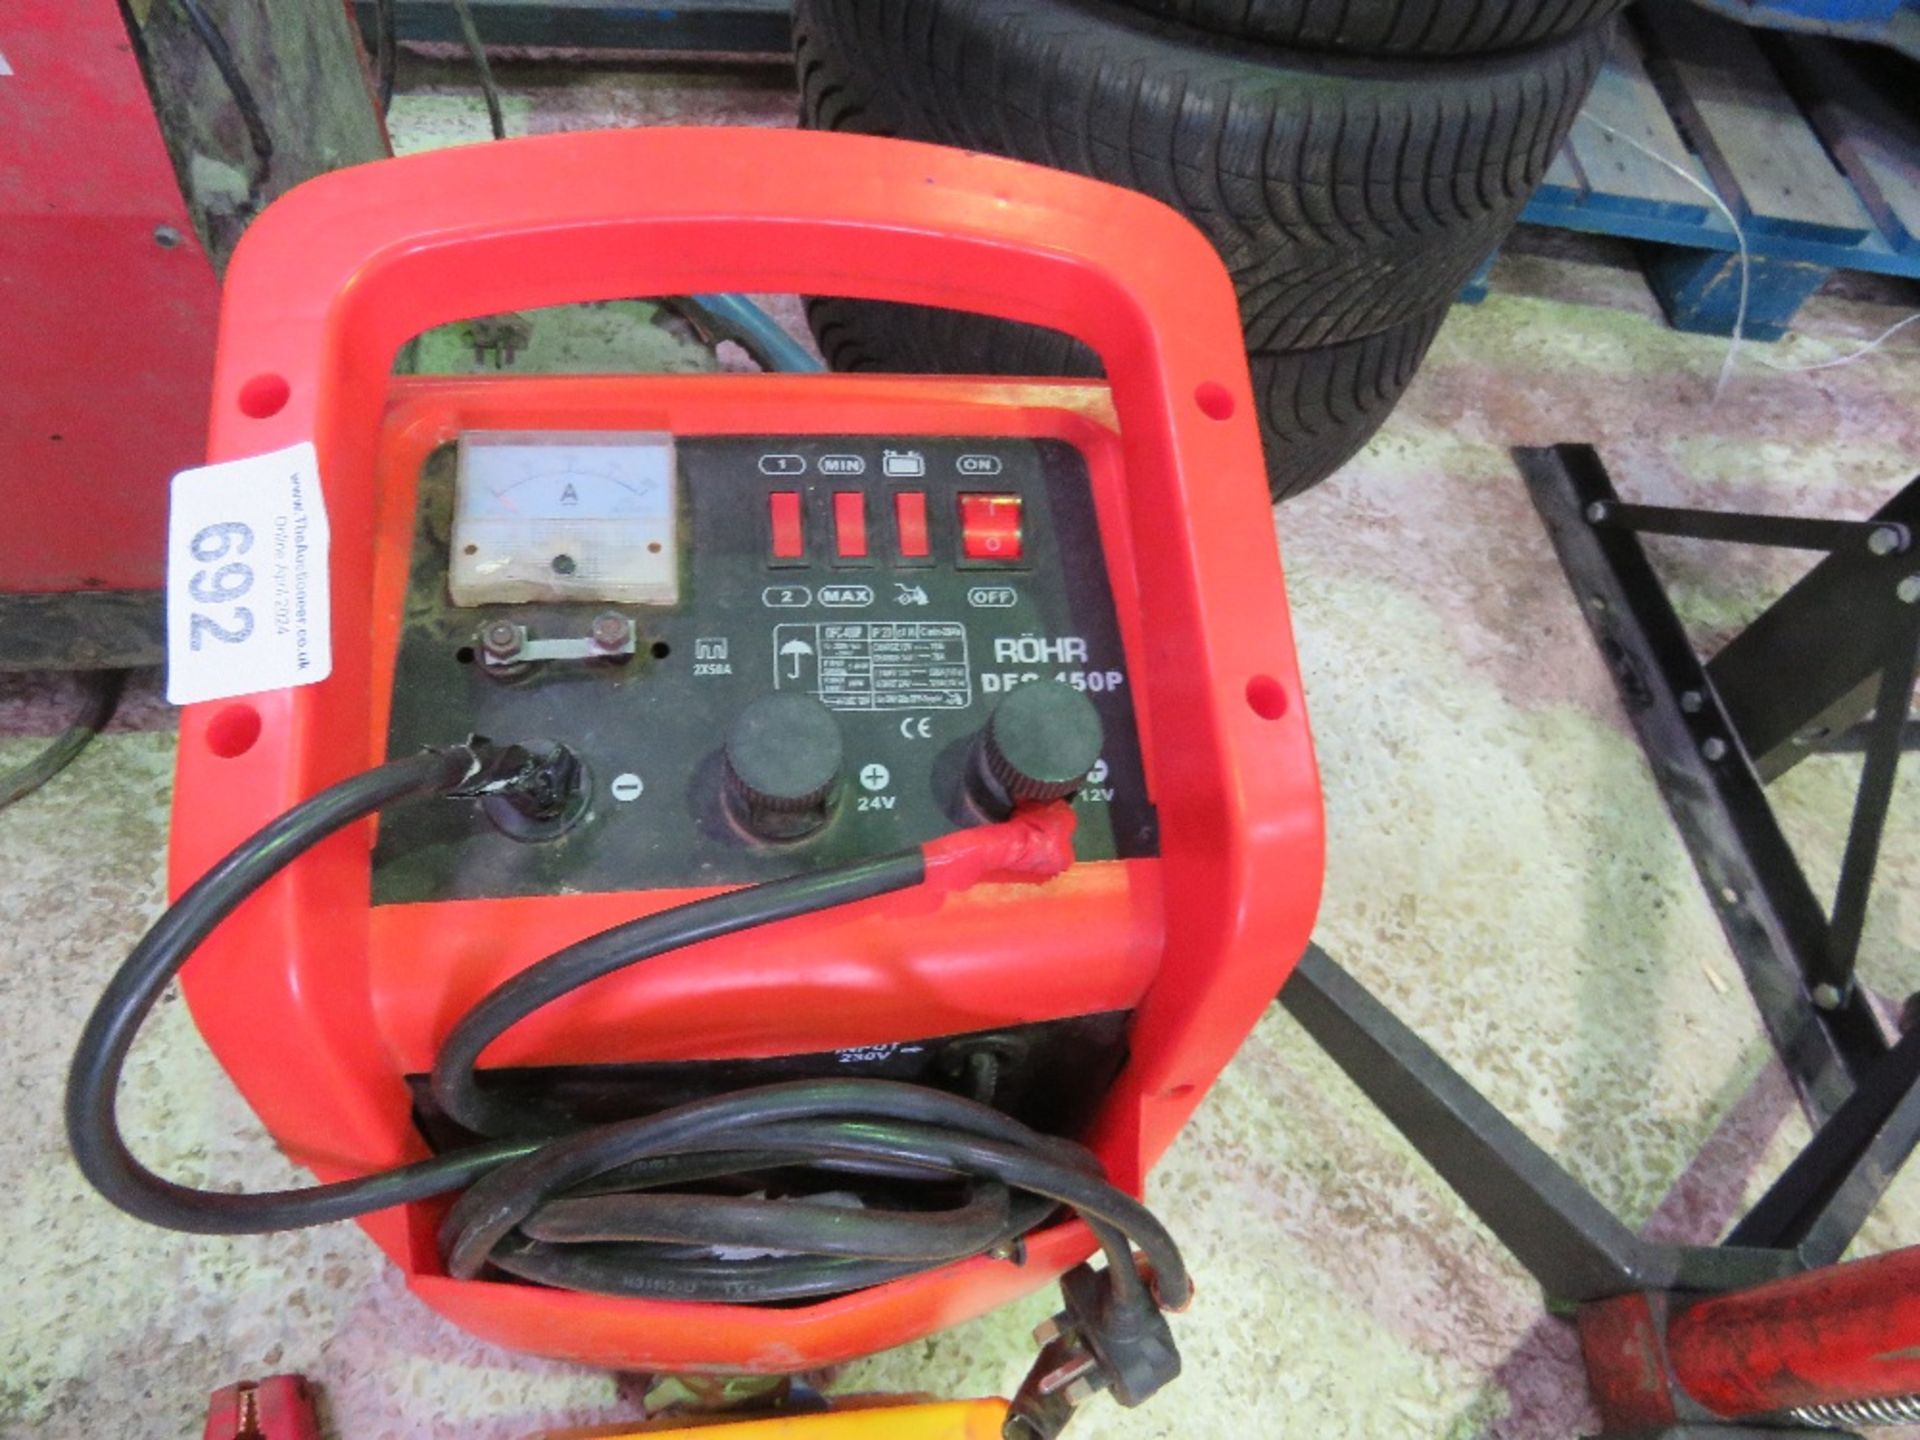 ROHR 12/24 VOLT BATTERY CHARGER PLUS A JUMP STARTER UNIT. SOURCED FROM GARAGE COMPANY LIQUIDATION. - Image 2 of 7